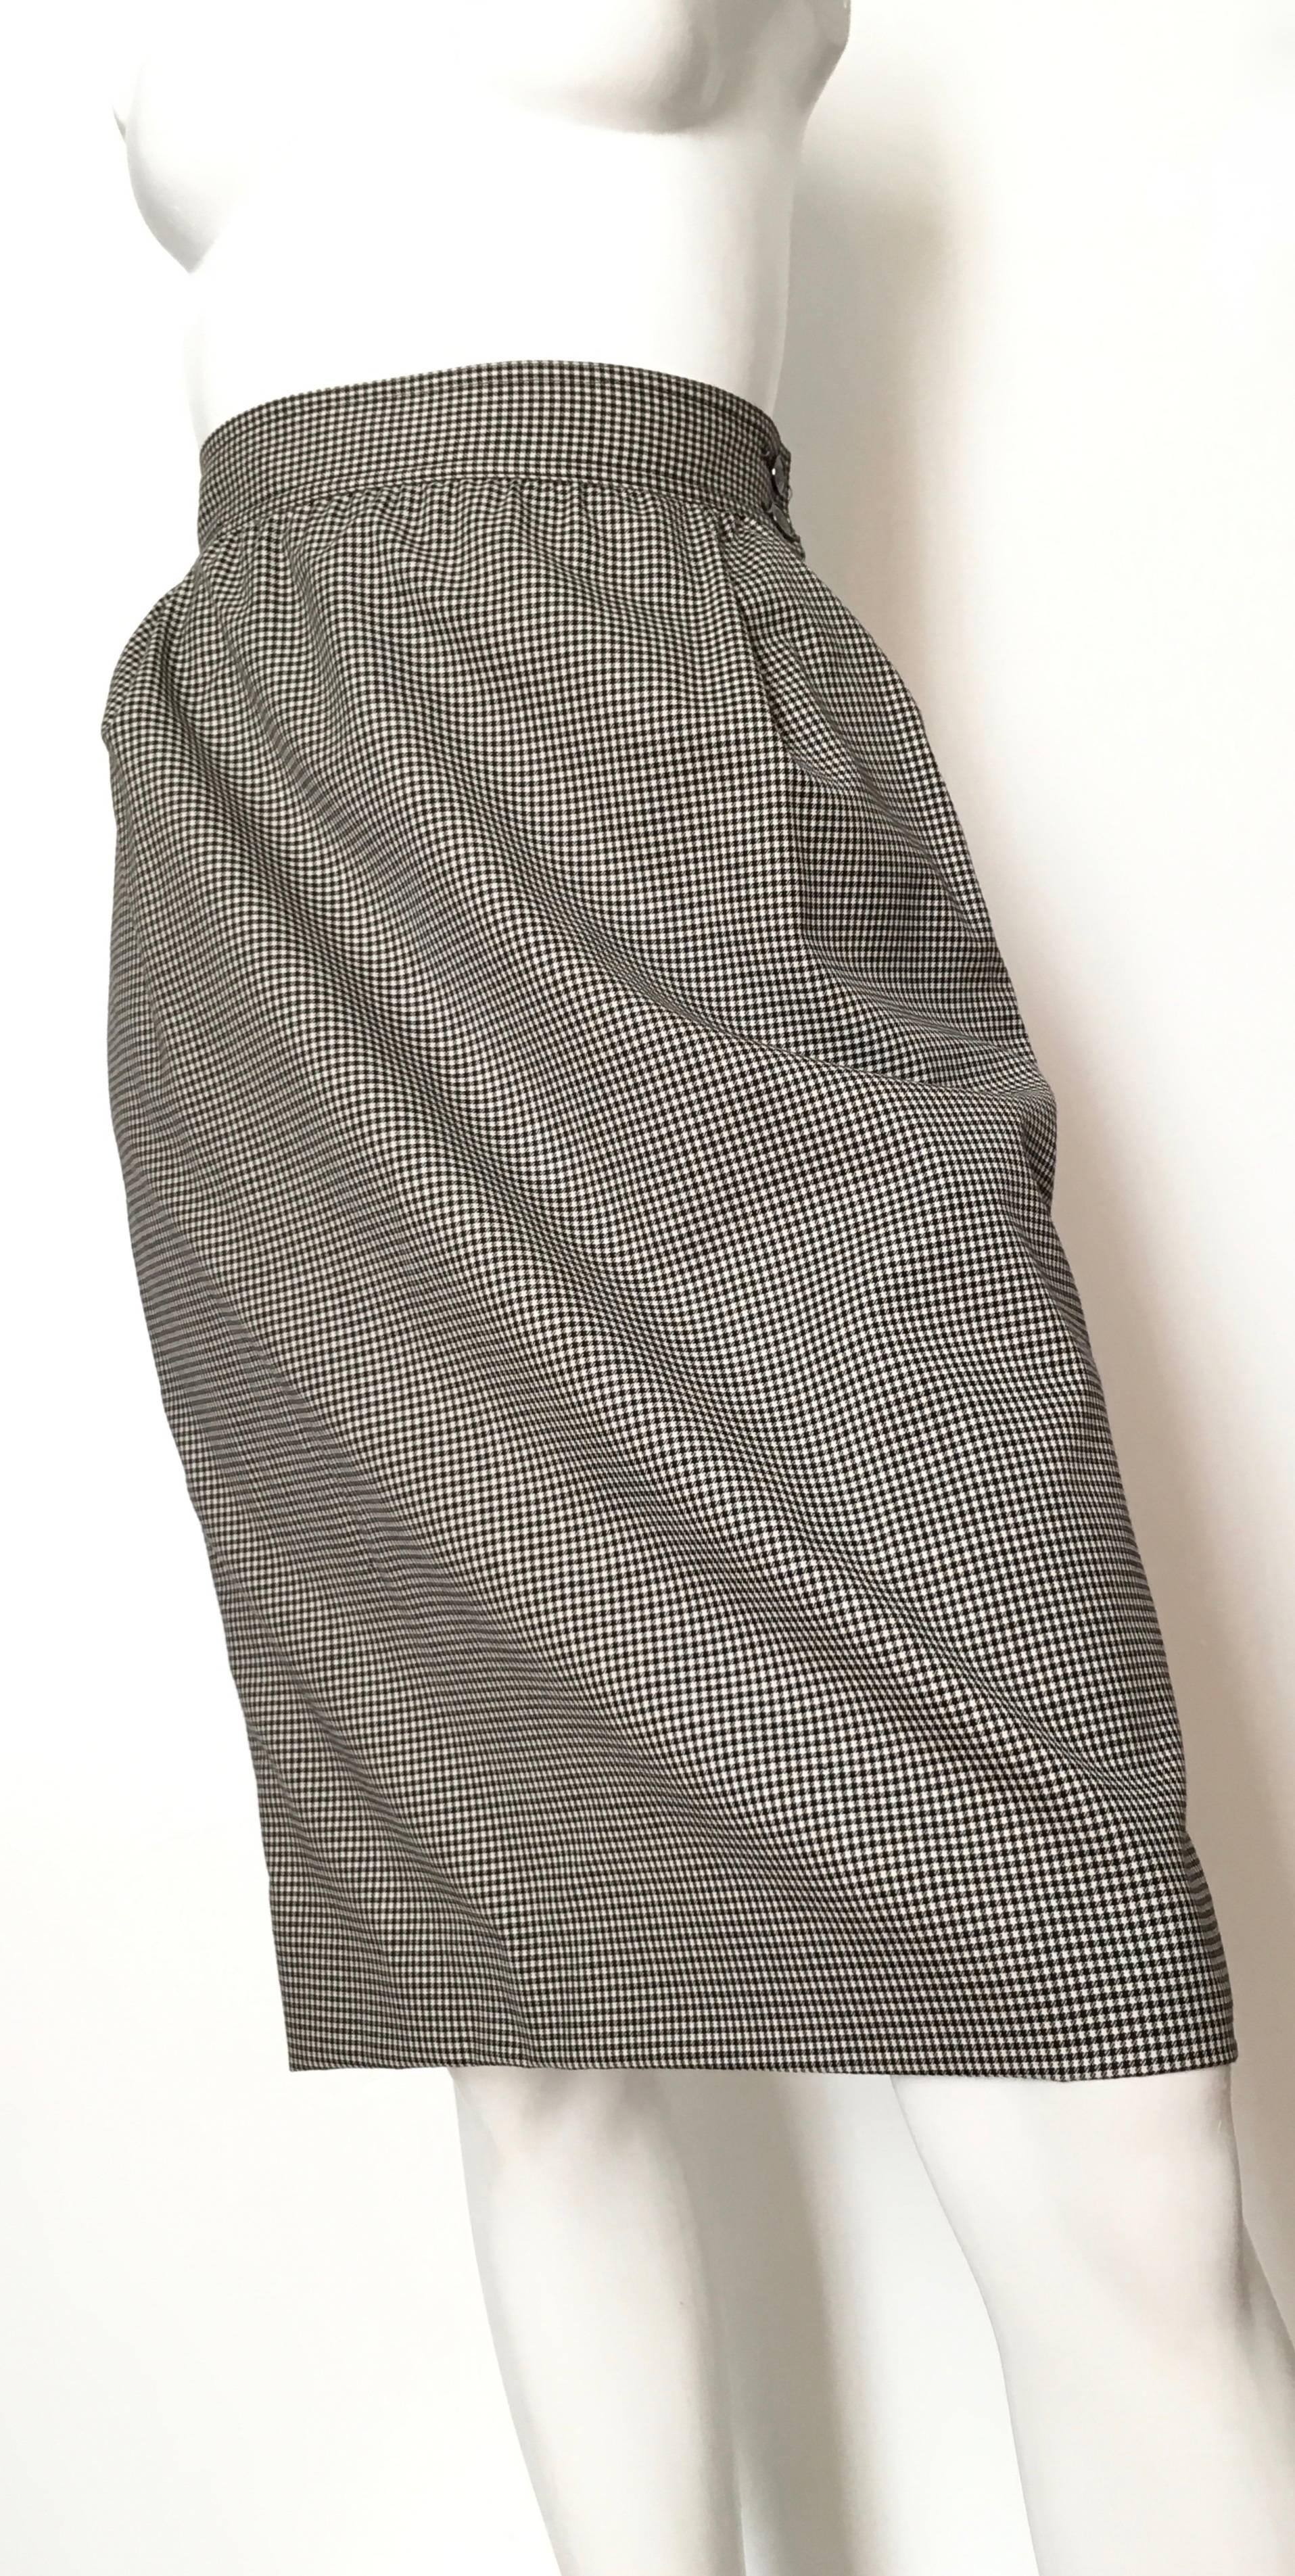 Ungaro 1980s Black and White Check Pattern Skirt Suit Size 10. In Excellent Condition For Sale In Atlanta, GA